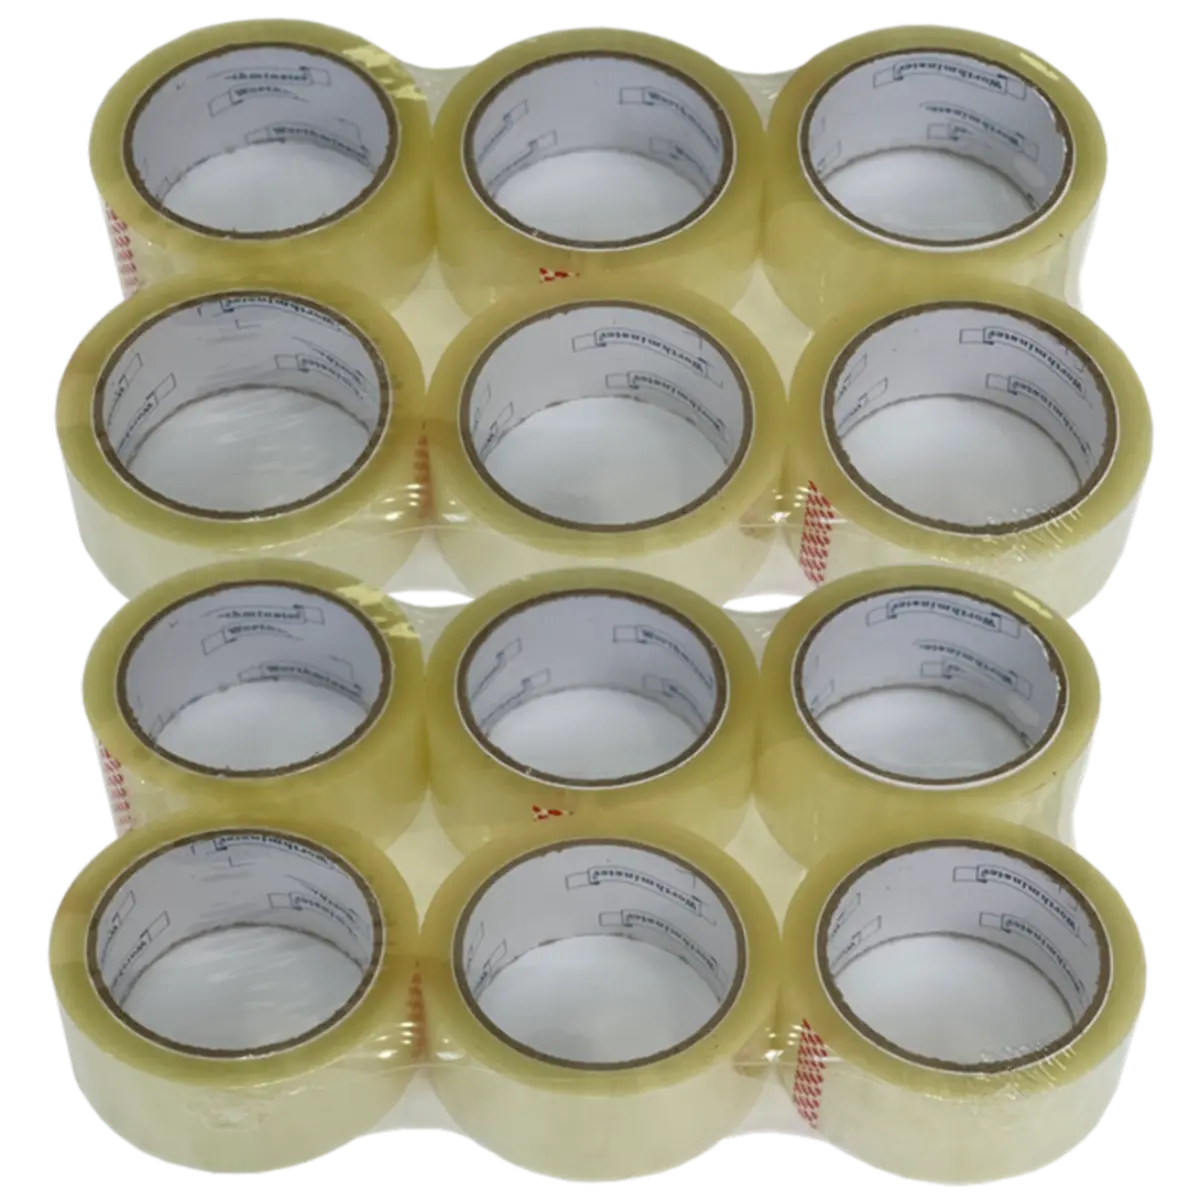 Adhesive Packaging Tape Box Sealing Tape Clear 12 Pack